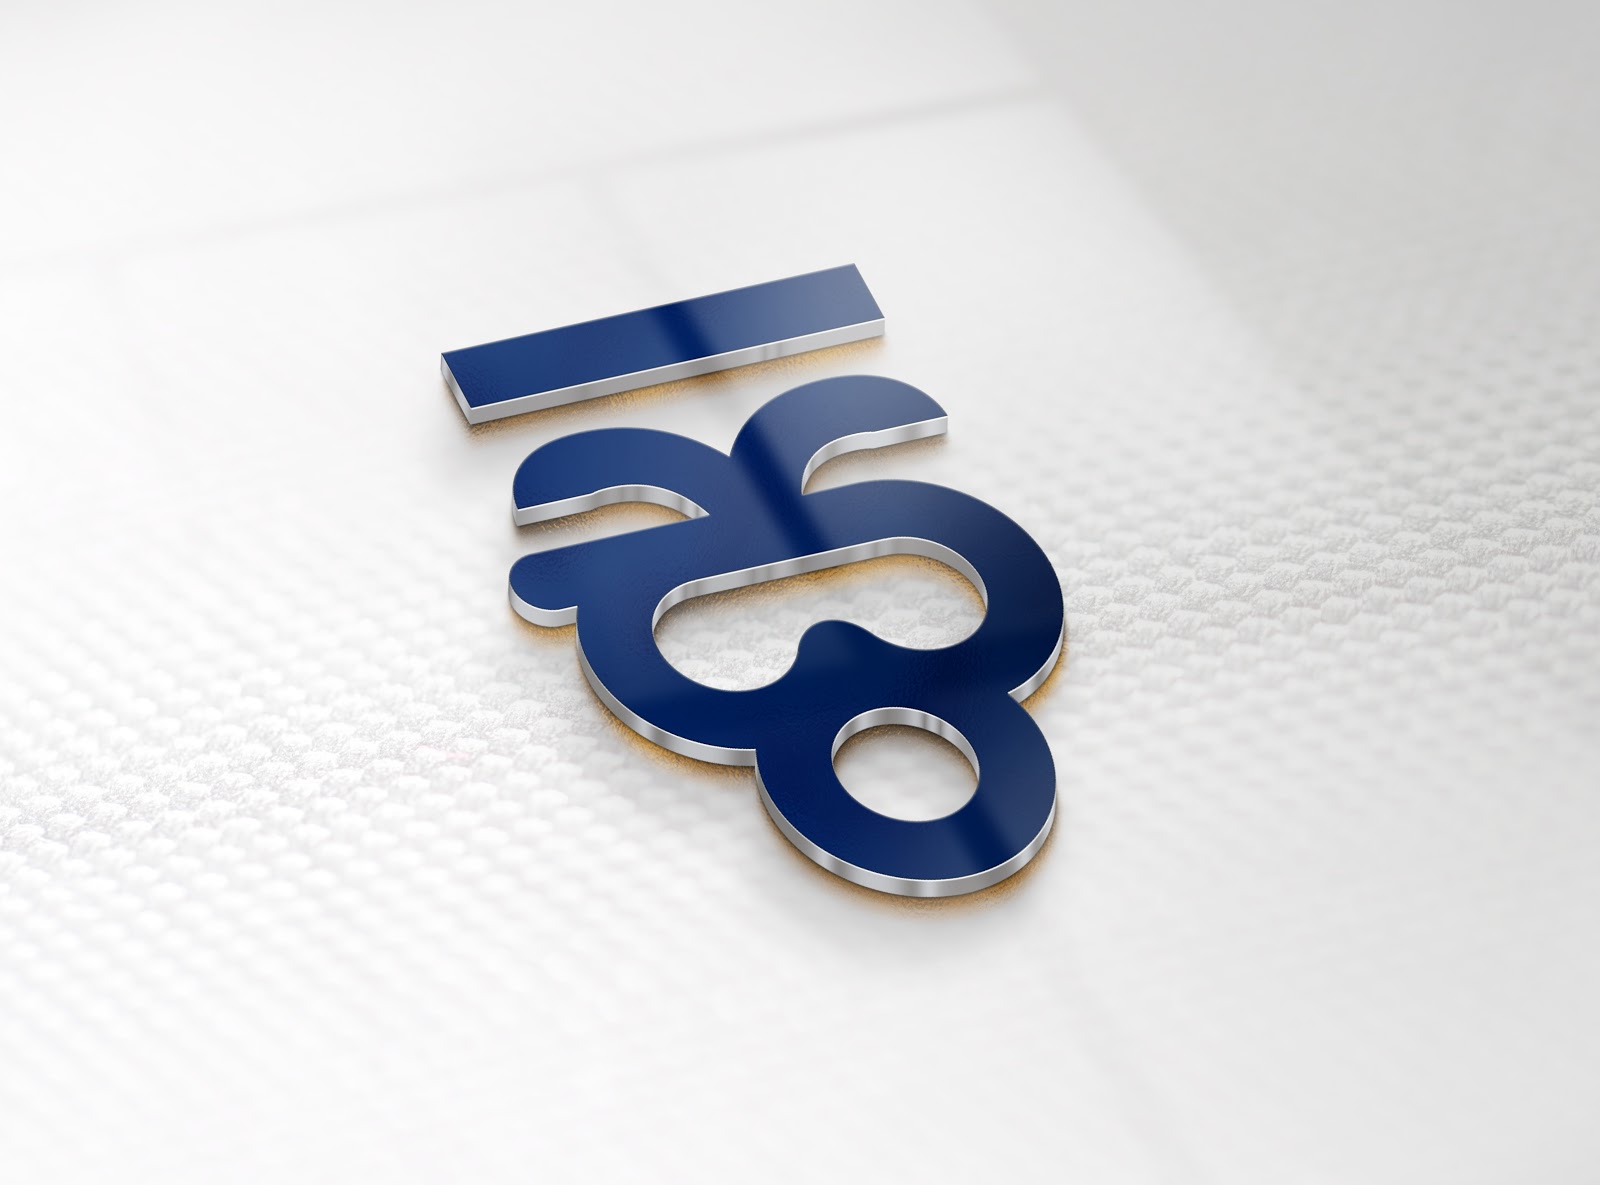 Download Free 3D Logo Mockup free download (PSD) - Graphic Temple